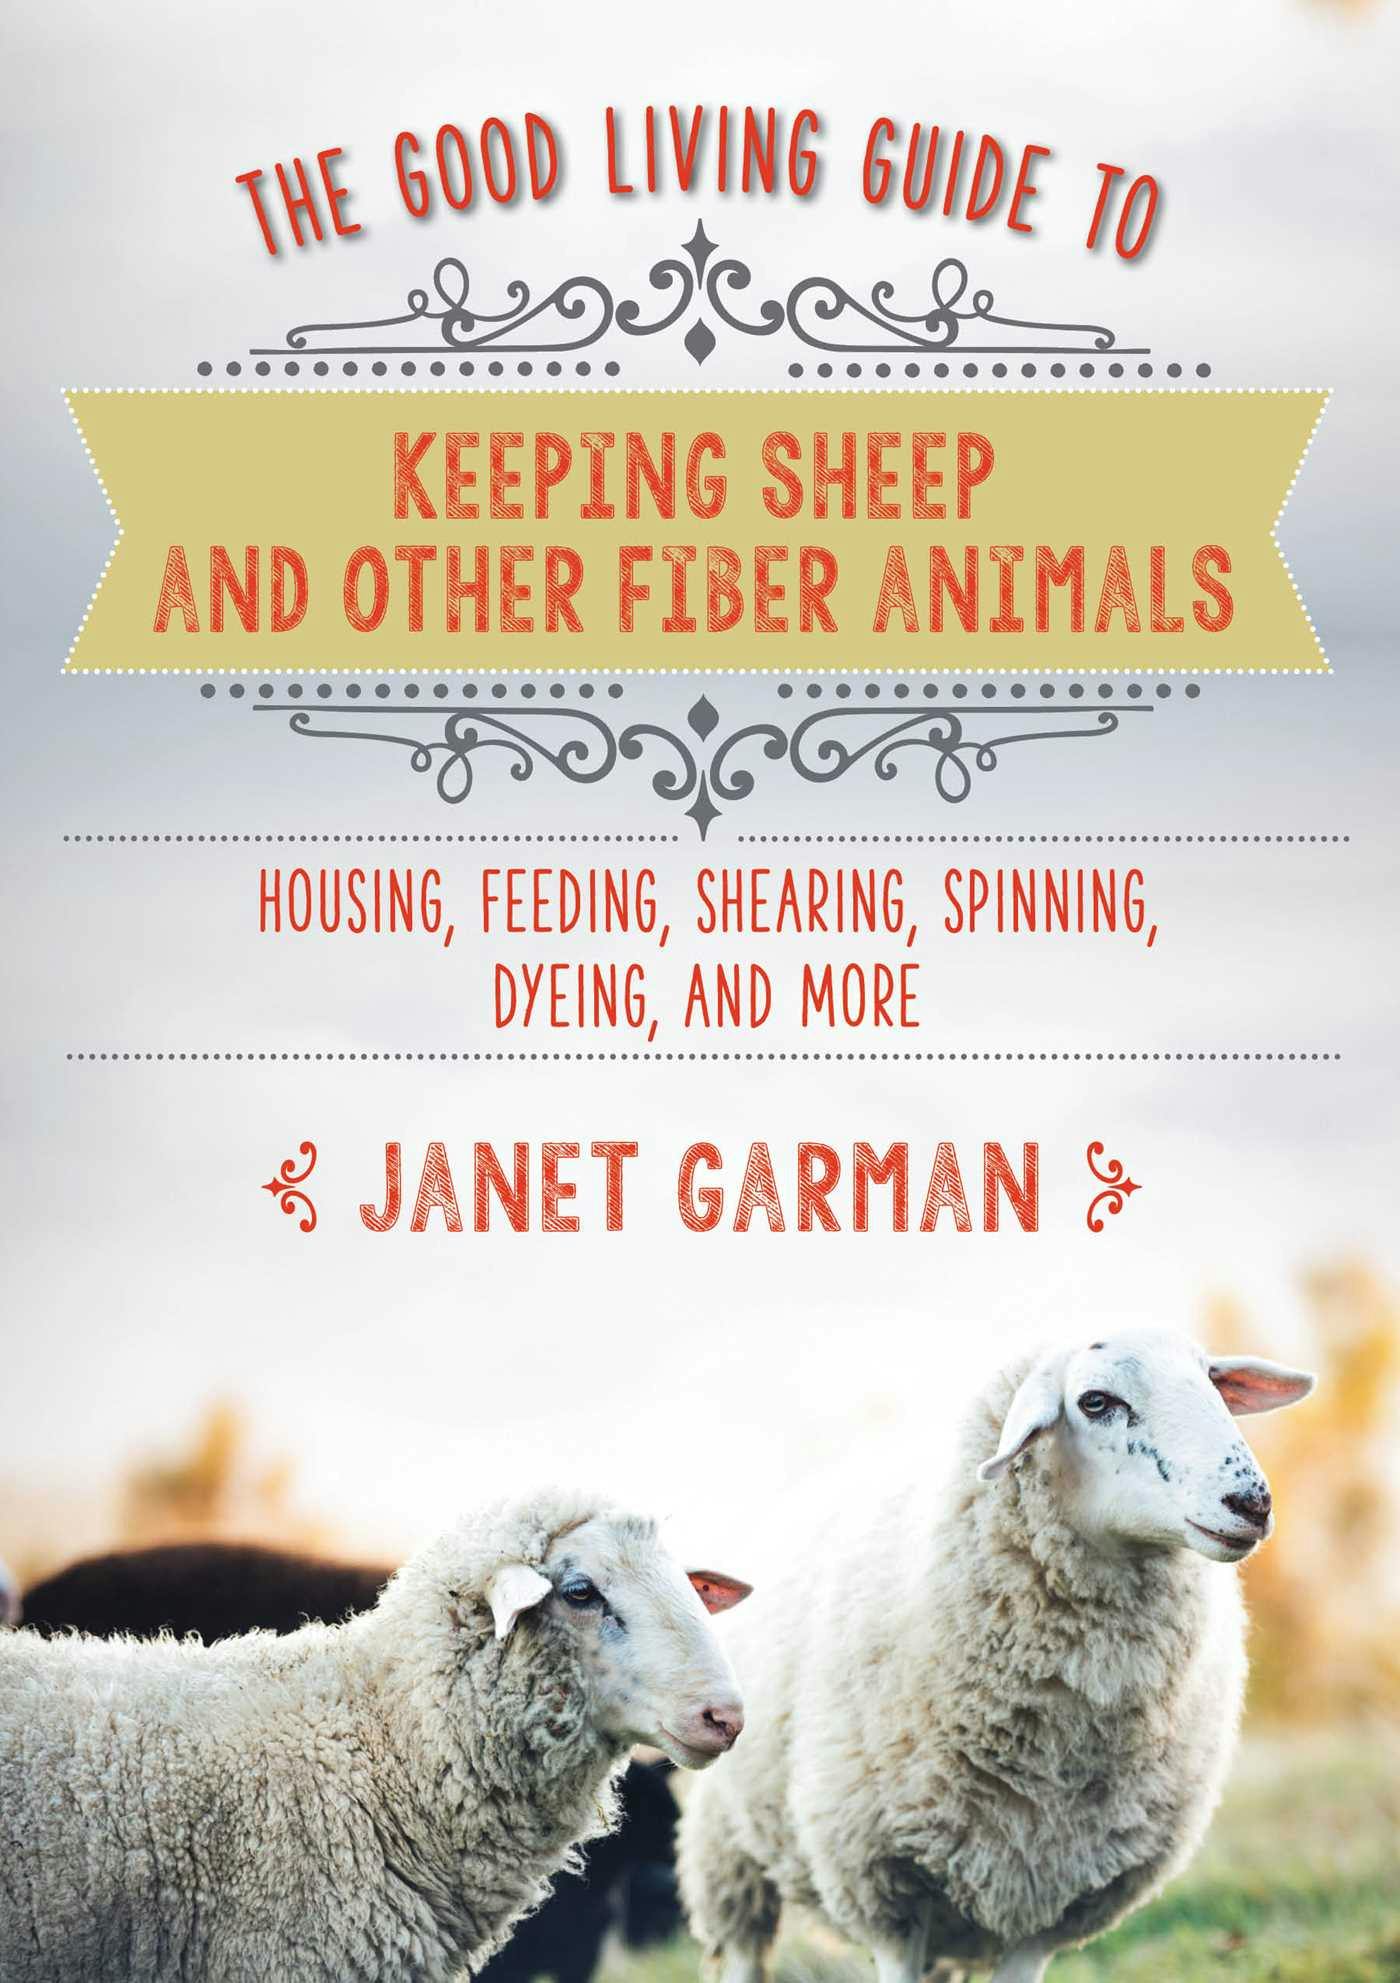 The Good Living Guide to Keeping Sheep and Other Fiber Animals: Housing, Feeding, Shearing, Spinning, Dyeing, and More - Janet Garman